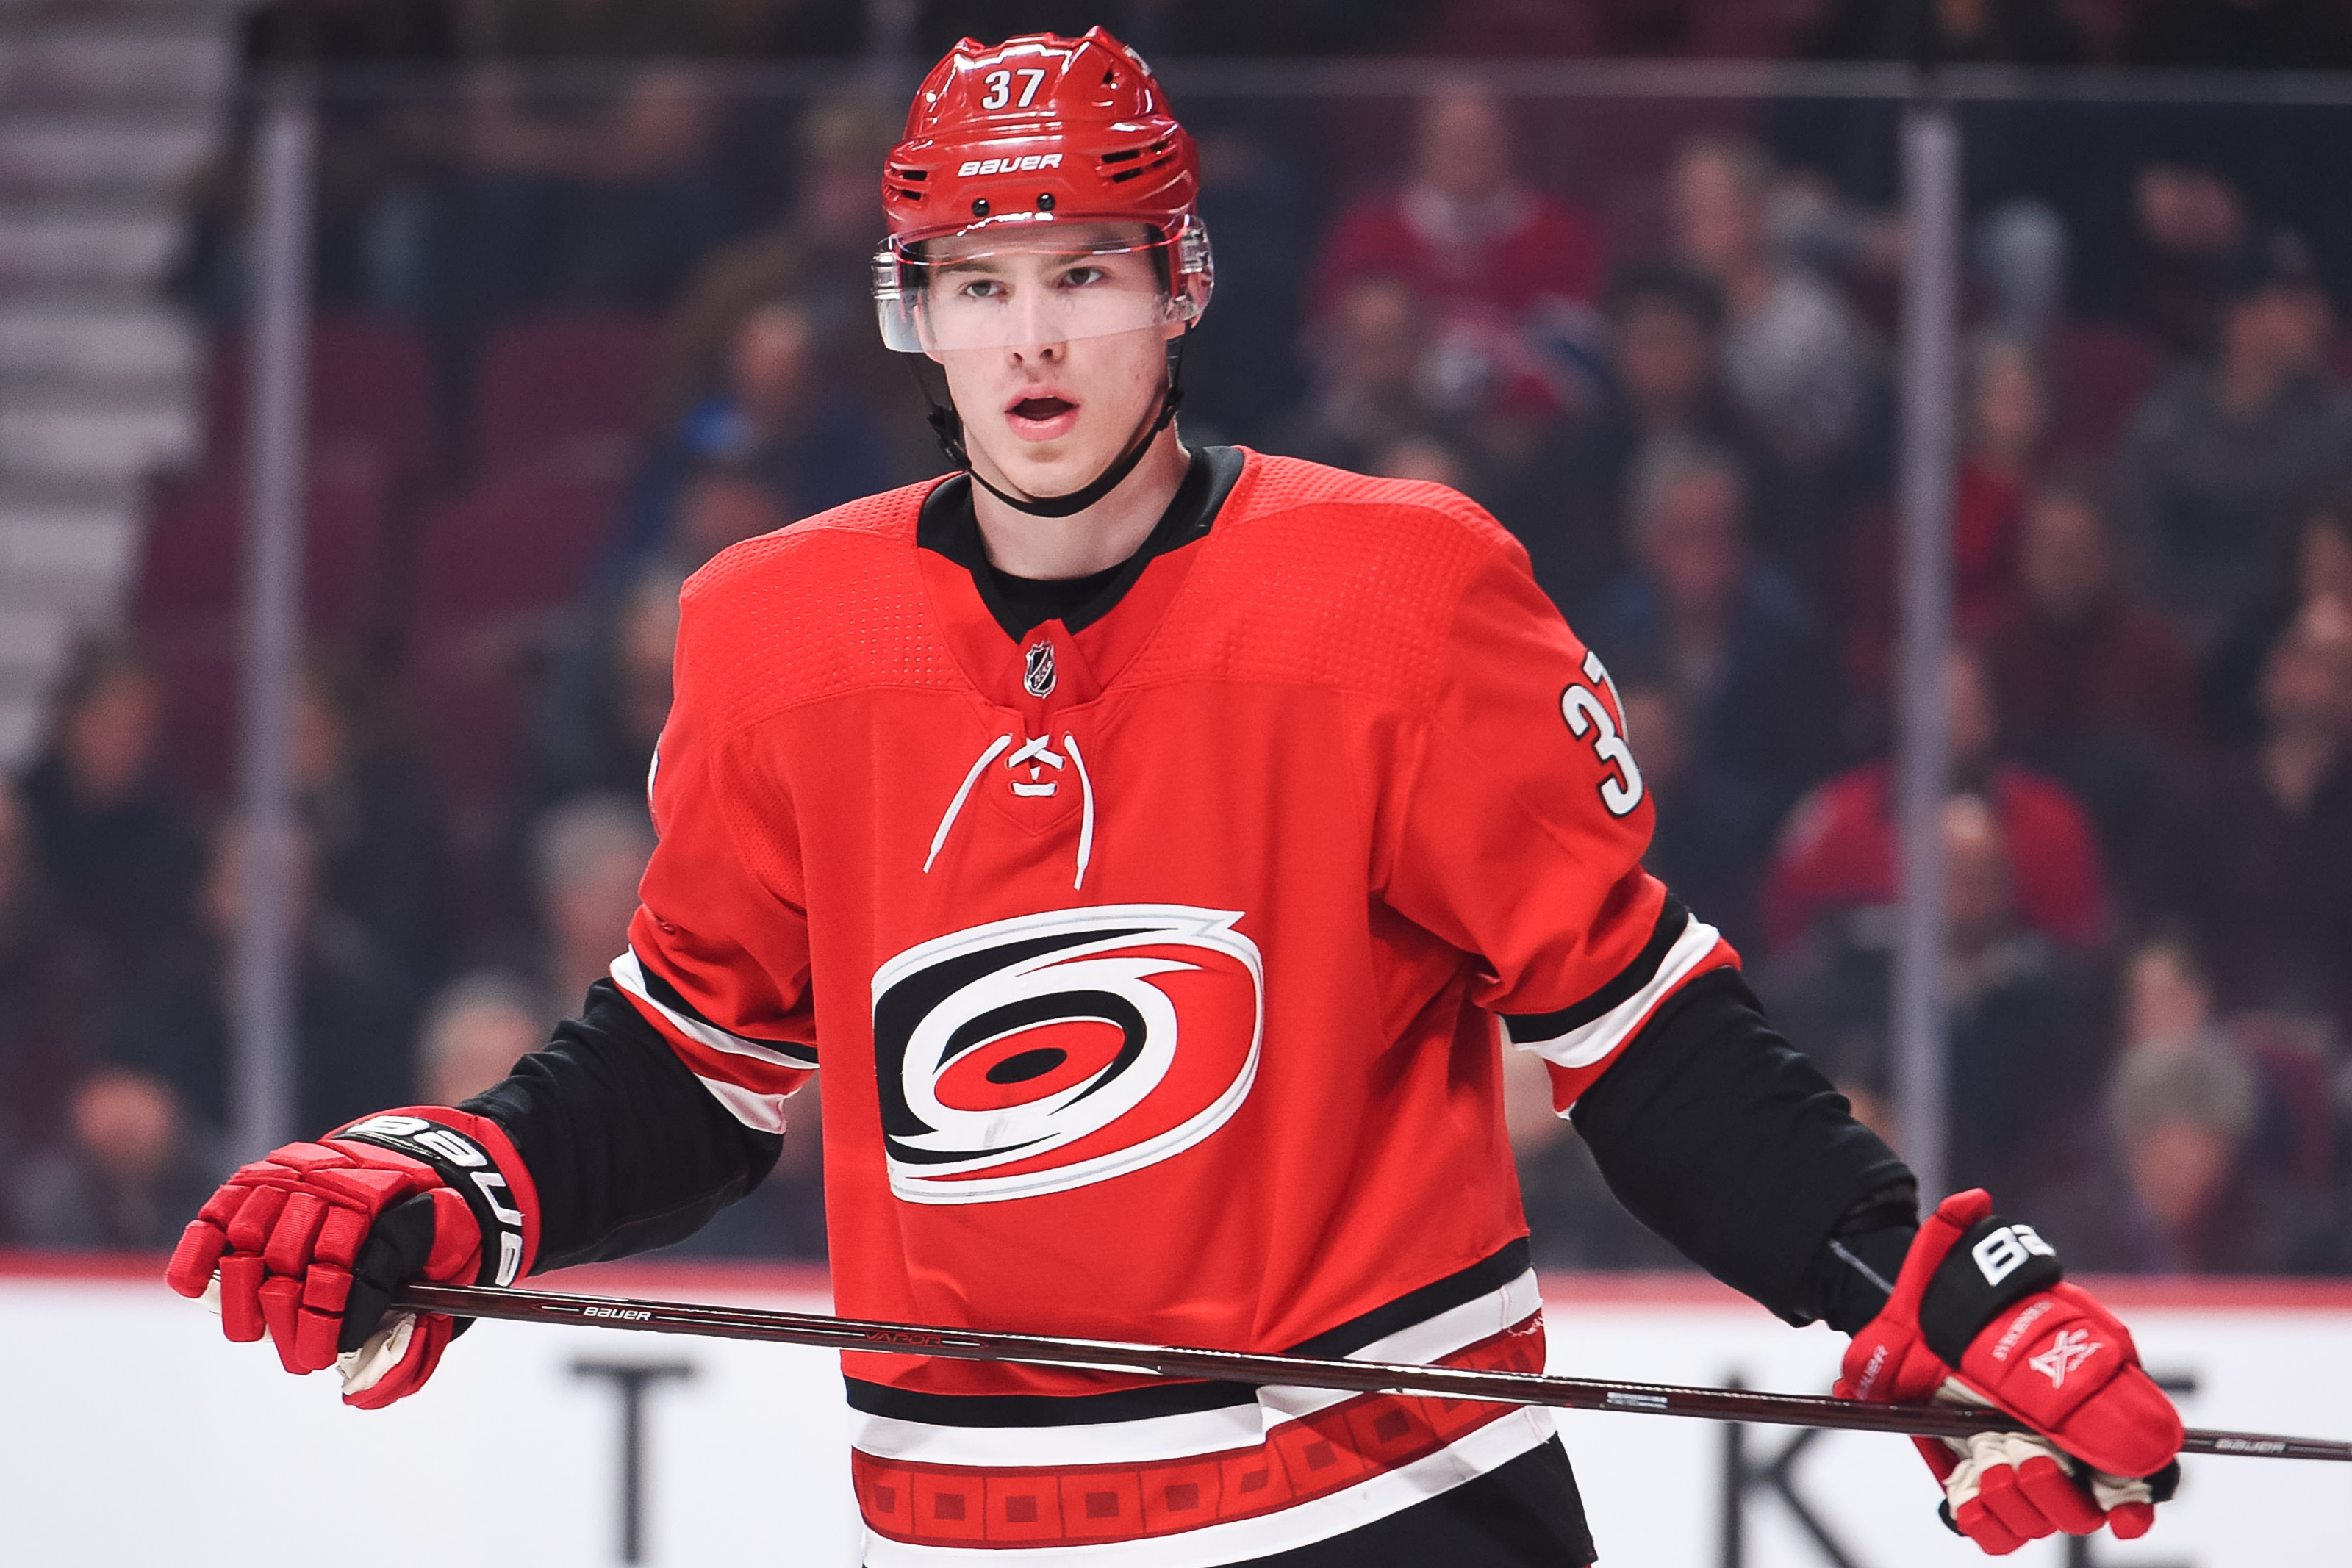 Just absolutely awful news for Andrei Svechnikov and the Carolina Hurricanes.  #NHLDiscussion